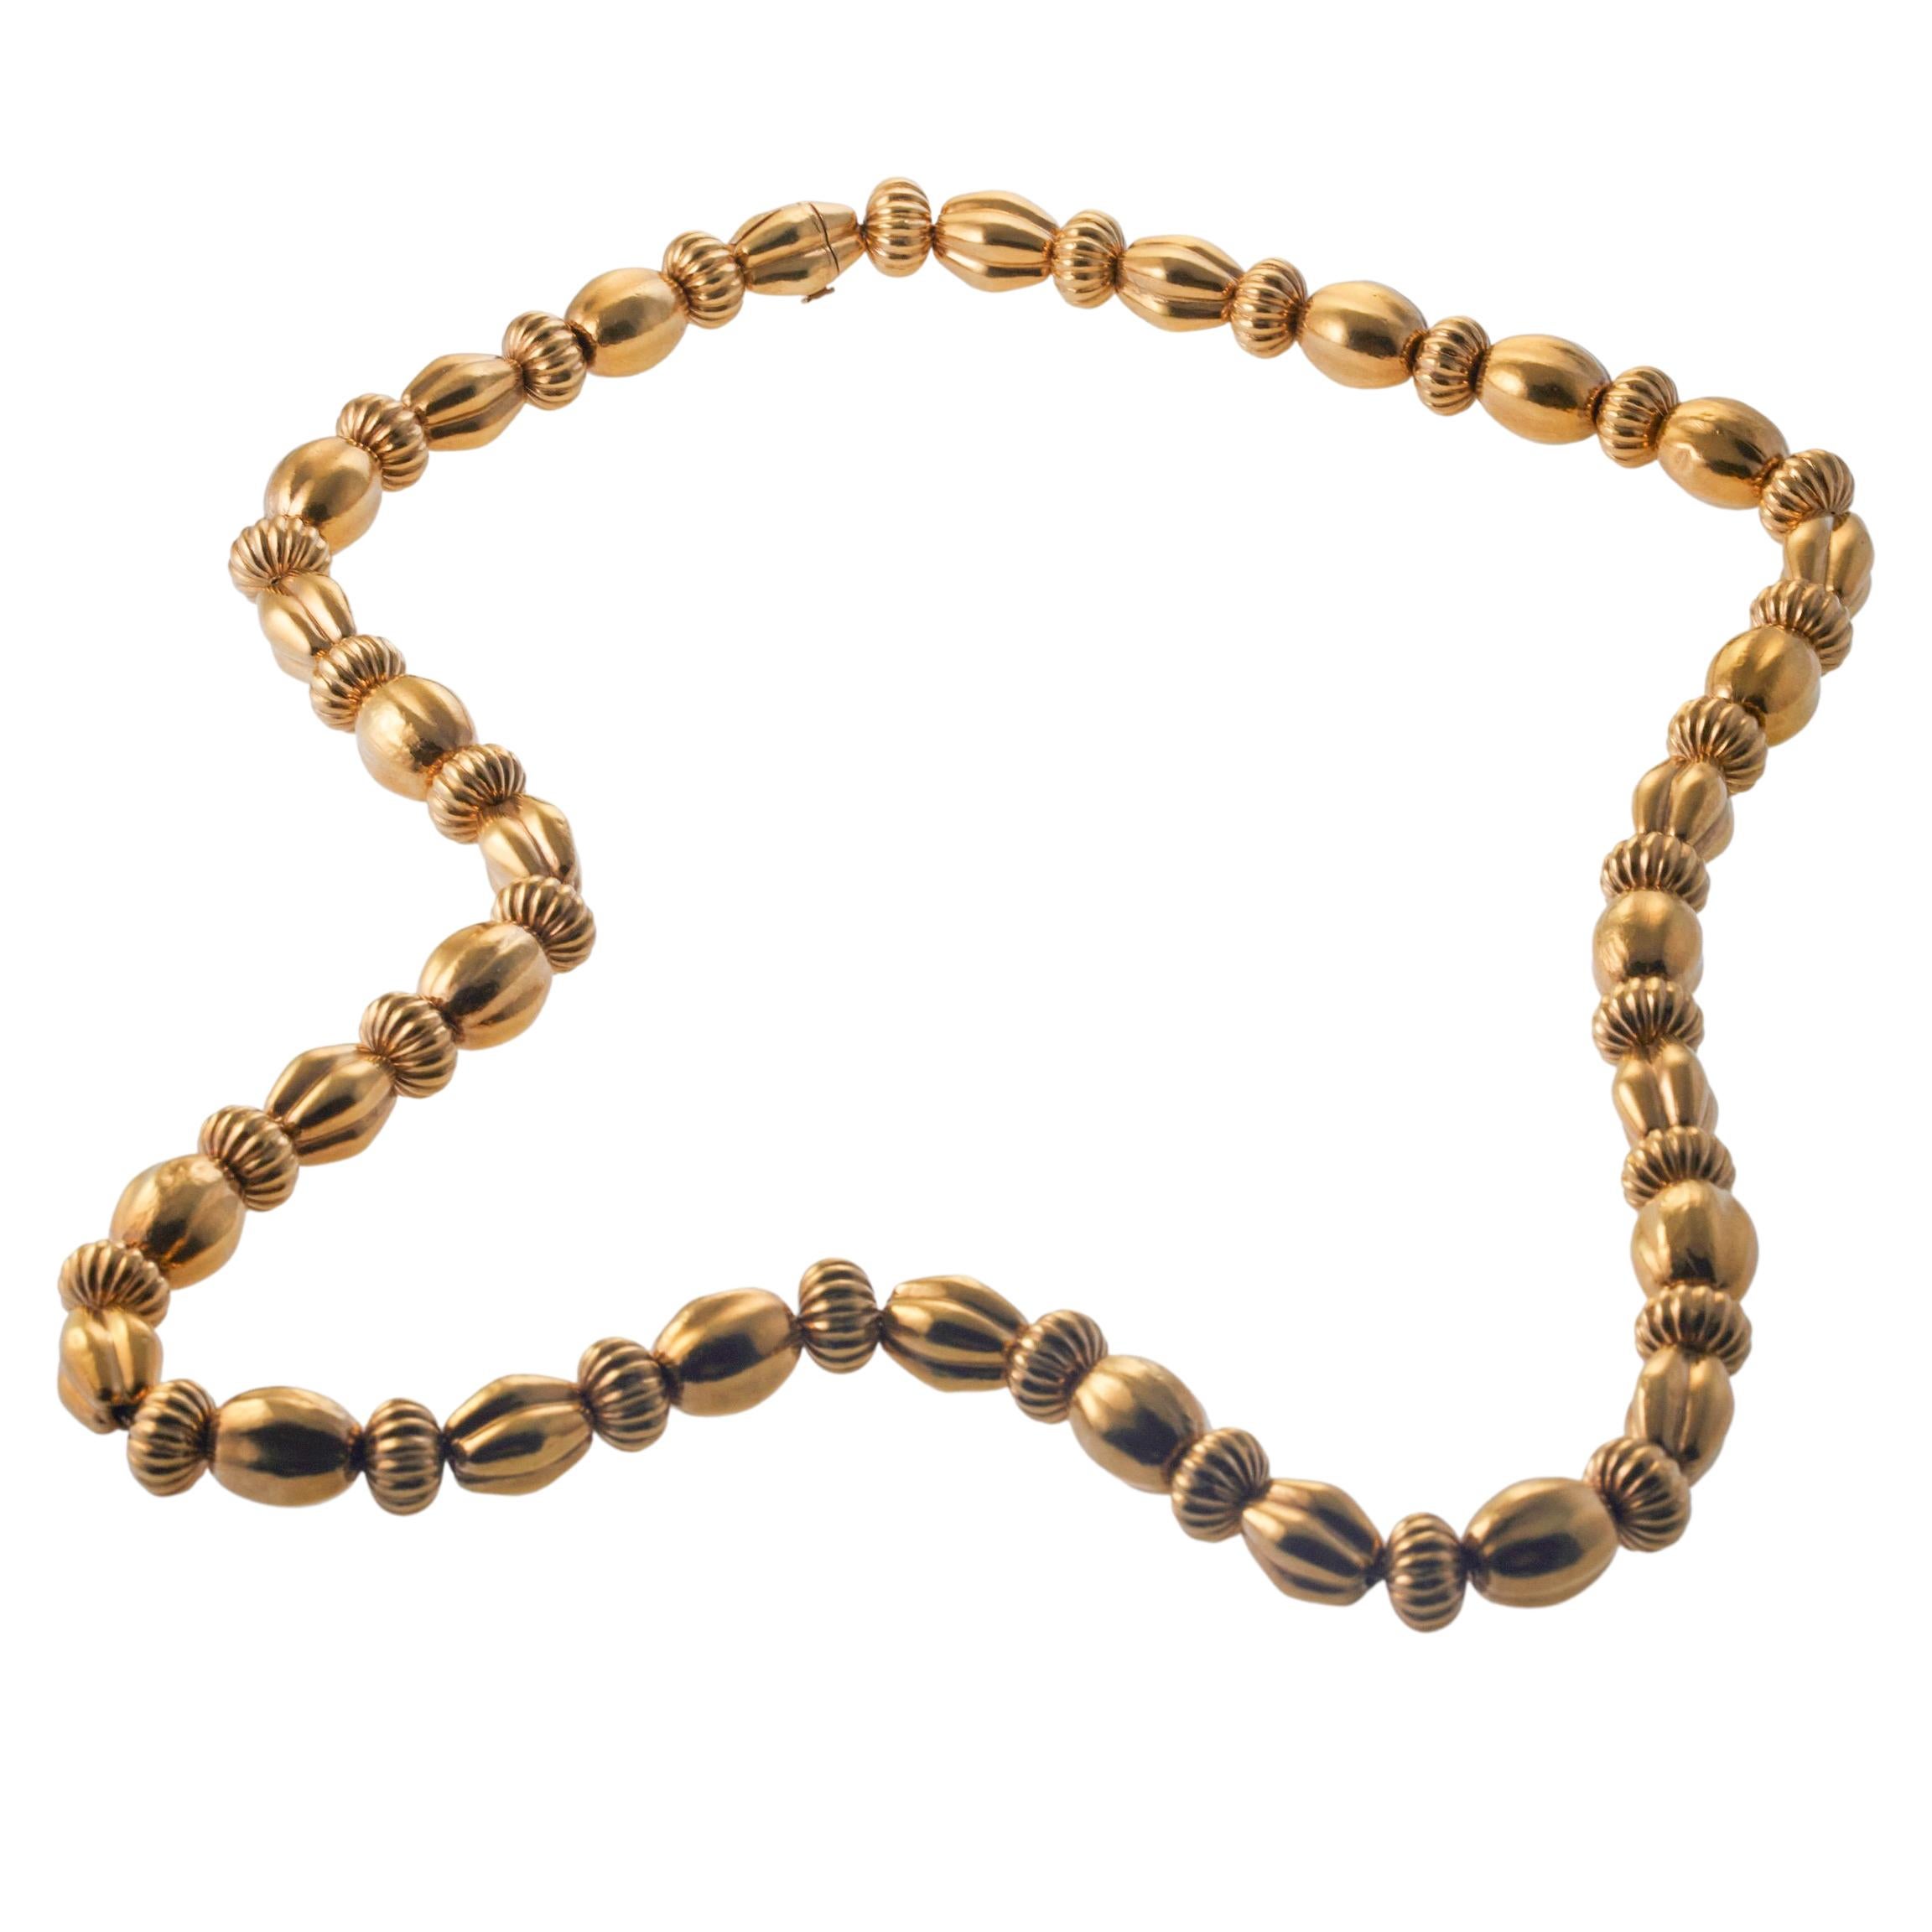 22k gold bead necklace by Ilias Lalaounis of Greece. Necklace measures 30.5